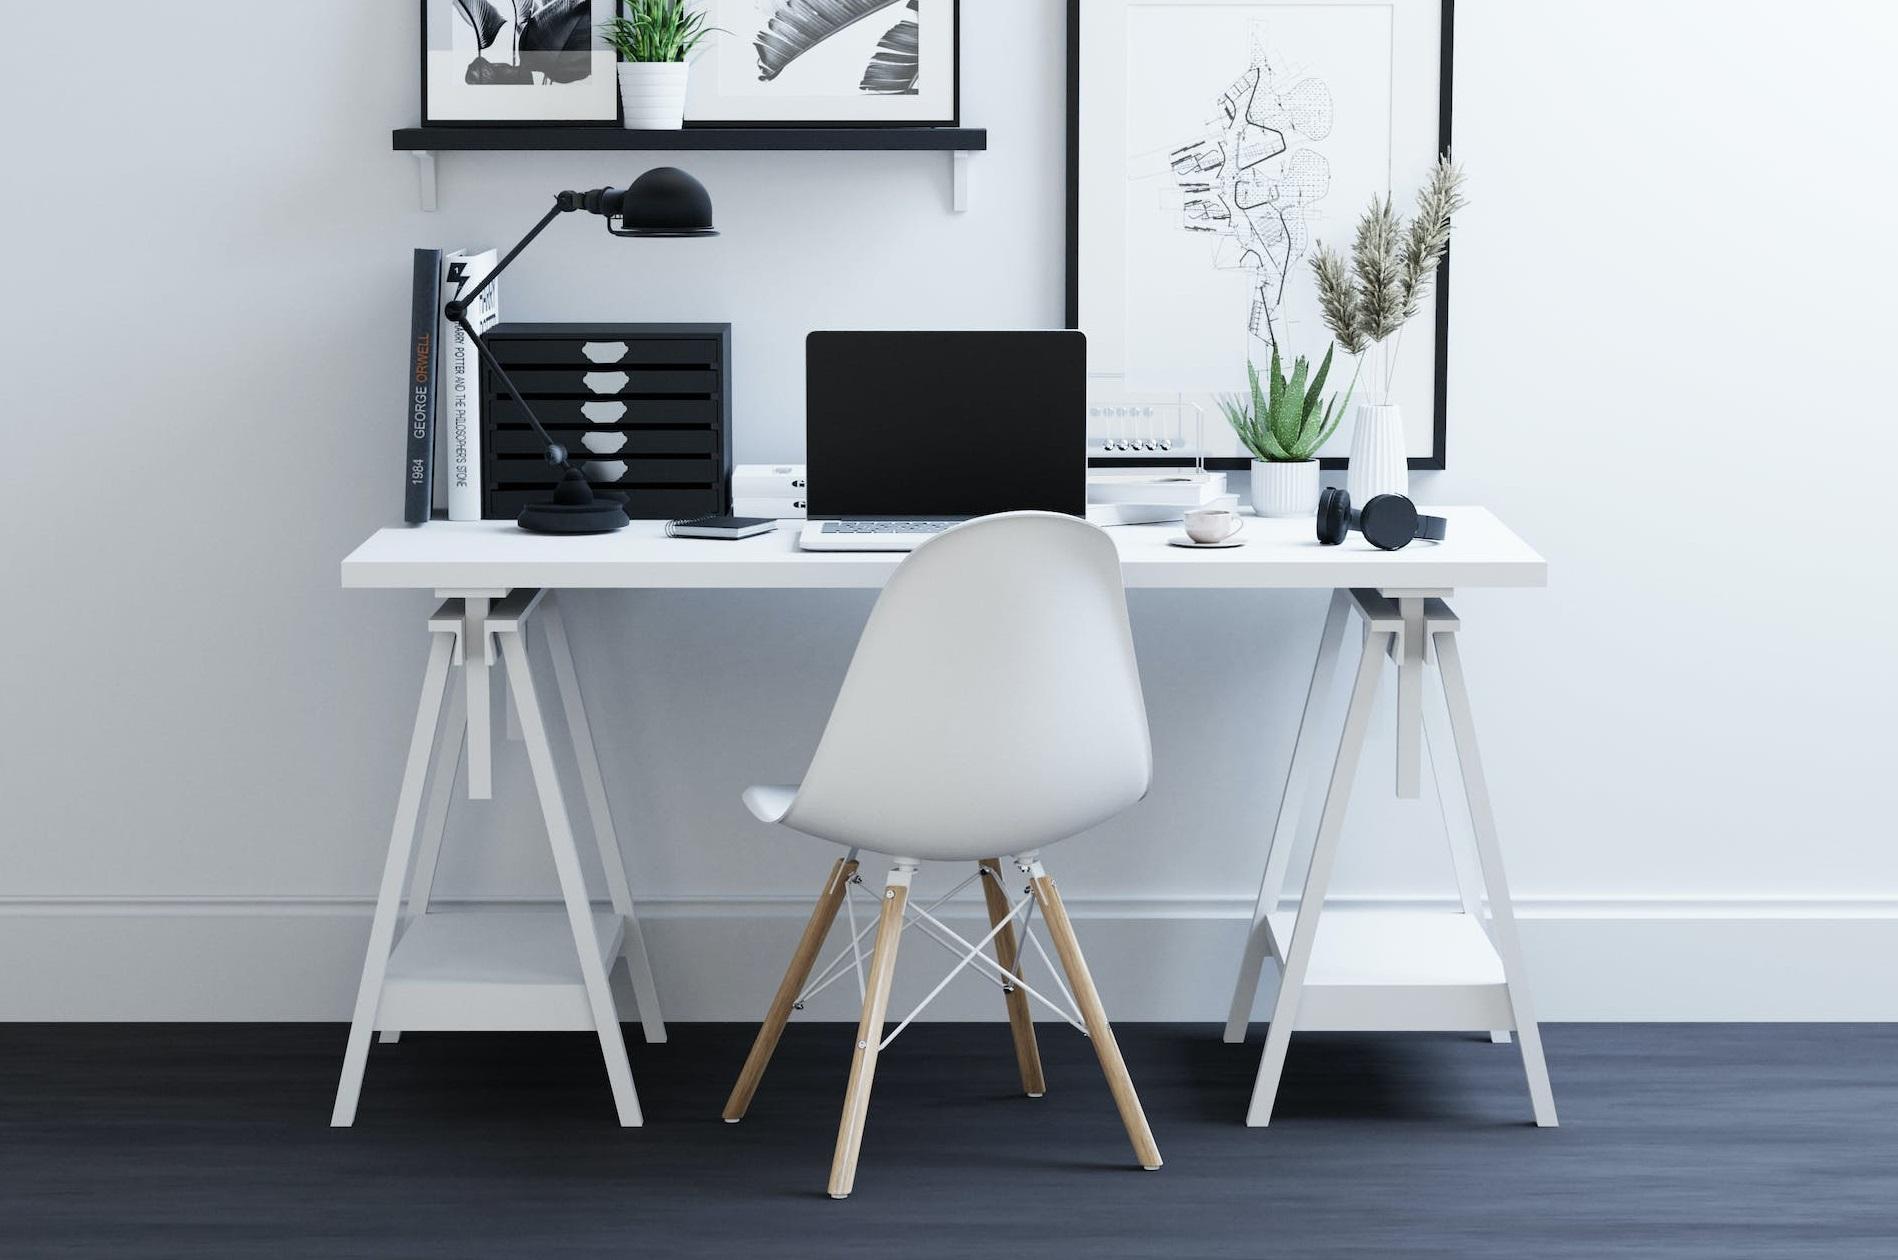 15 DIY Desks That Are Perfect For Your Home Office - Craftsonfire